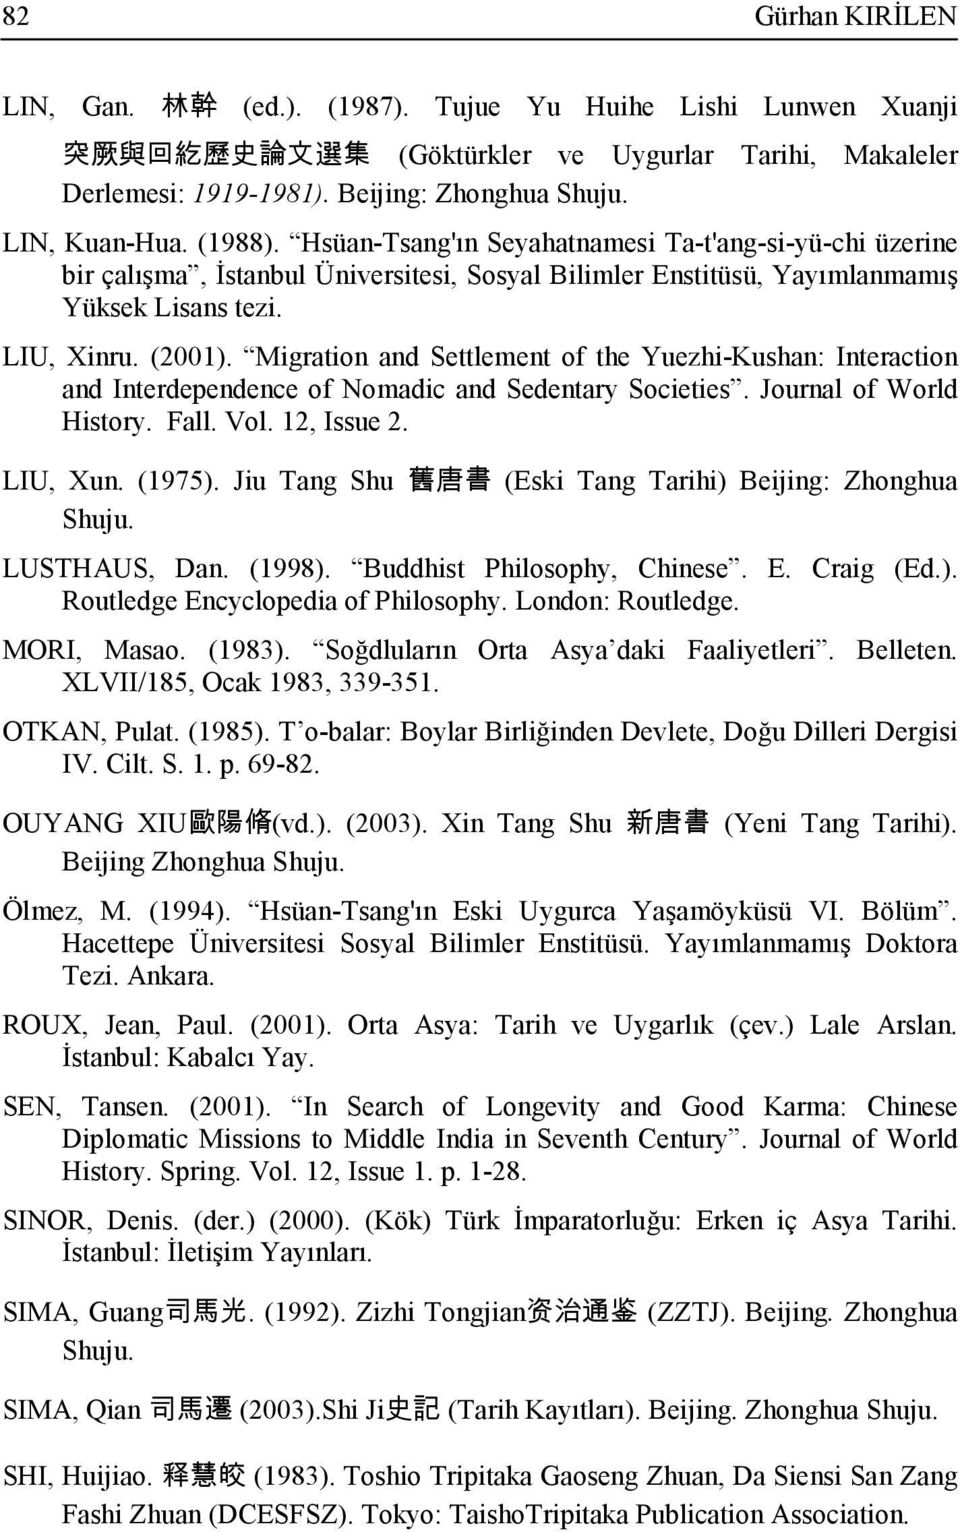 Migration and Settlement of the Yuezhi-Kushan: Interaction and Interdependence of Nomadic and Sedentary Societies. Journal of World History. Fall. Vol. 12, Issue 2. LIU, Xun. (1975).